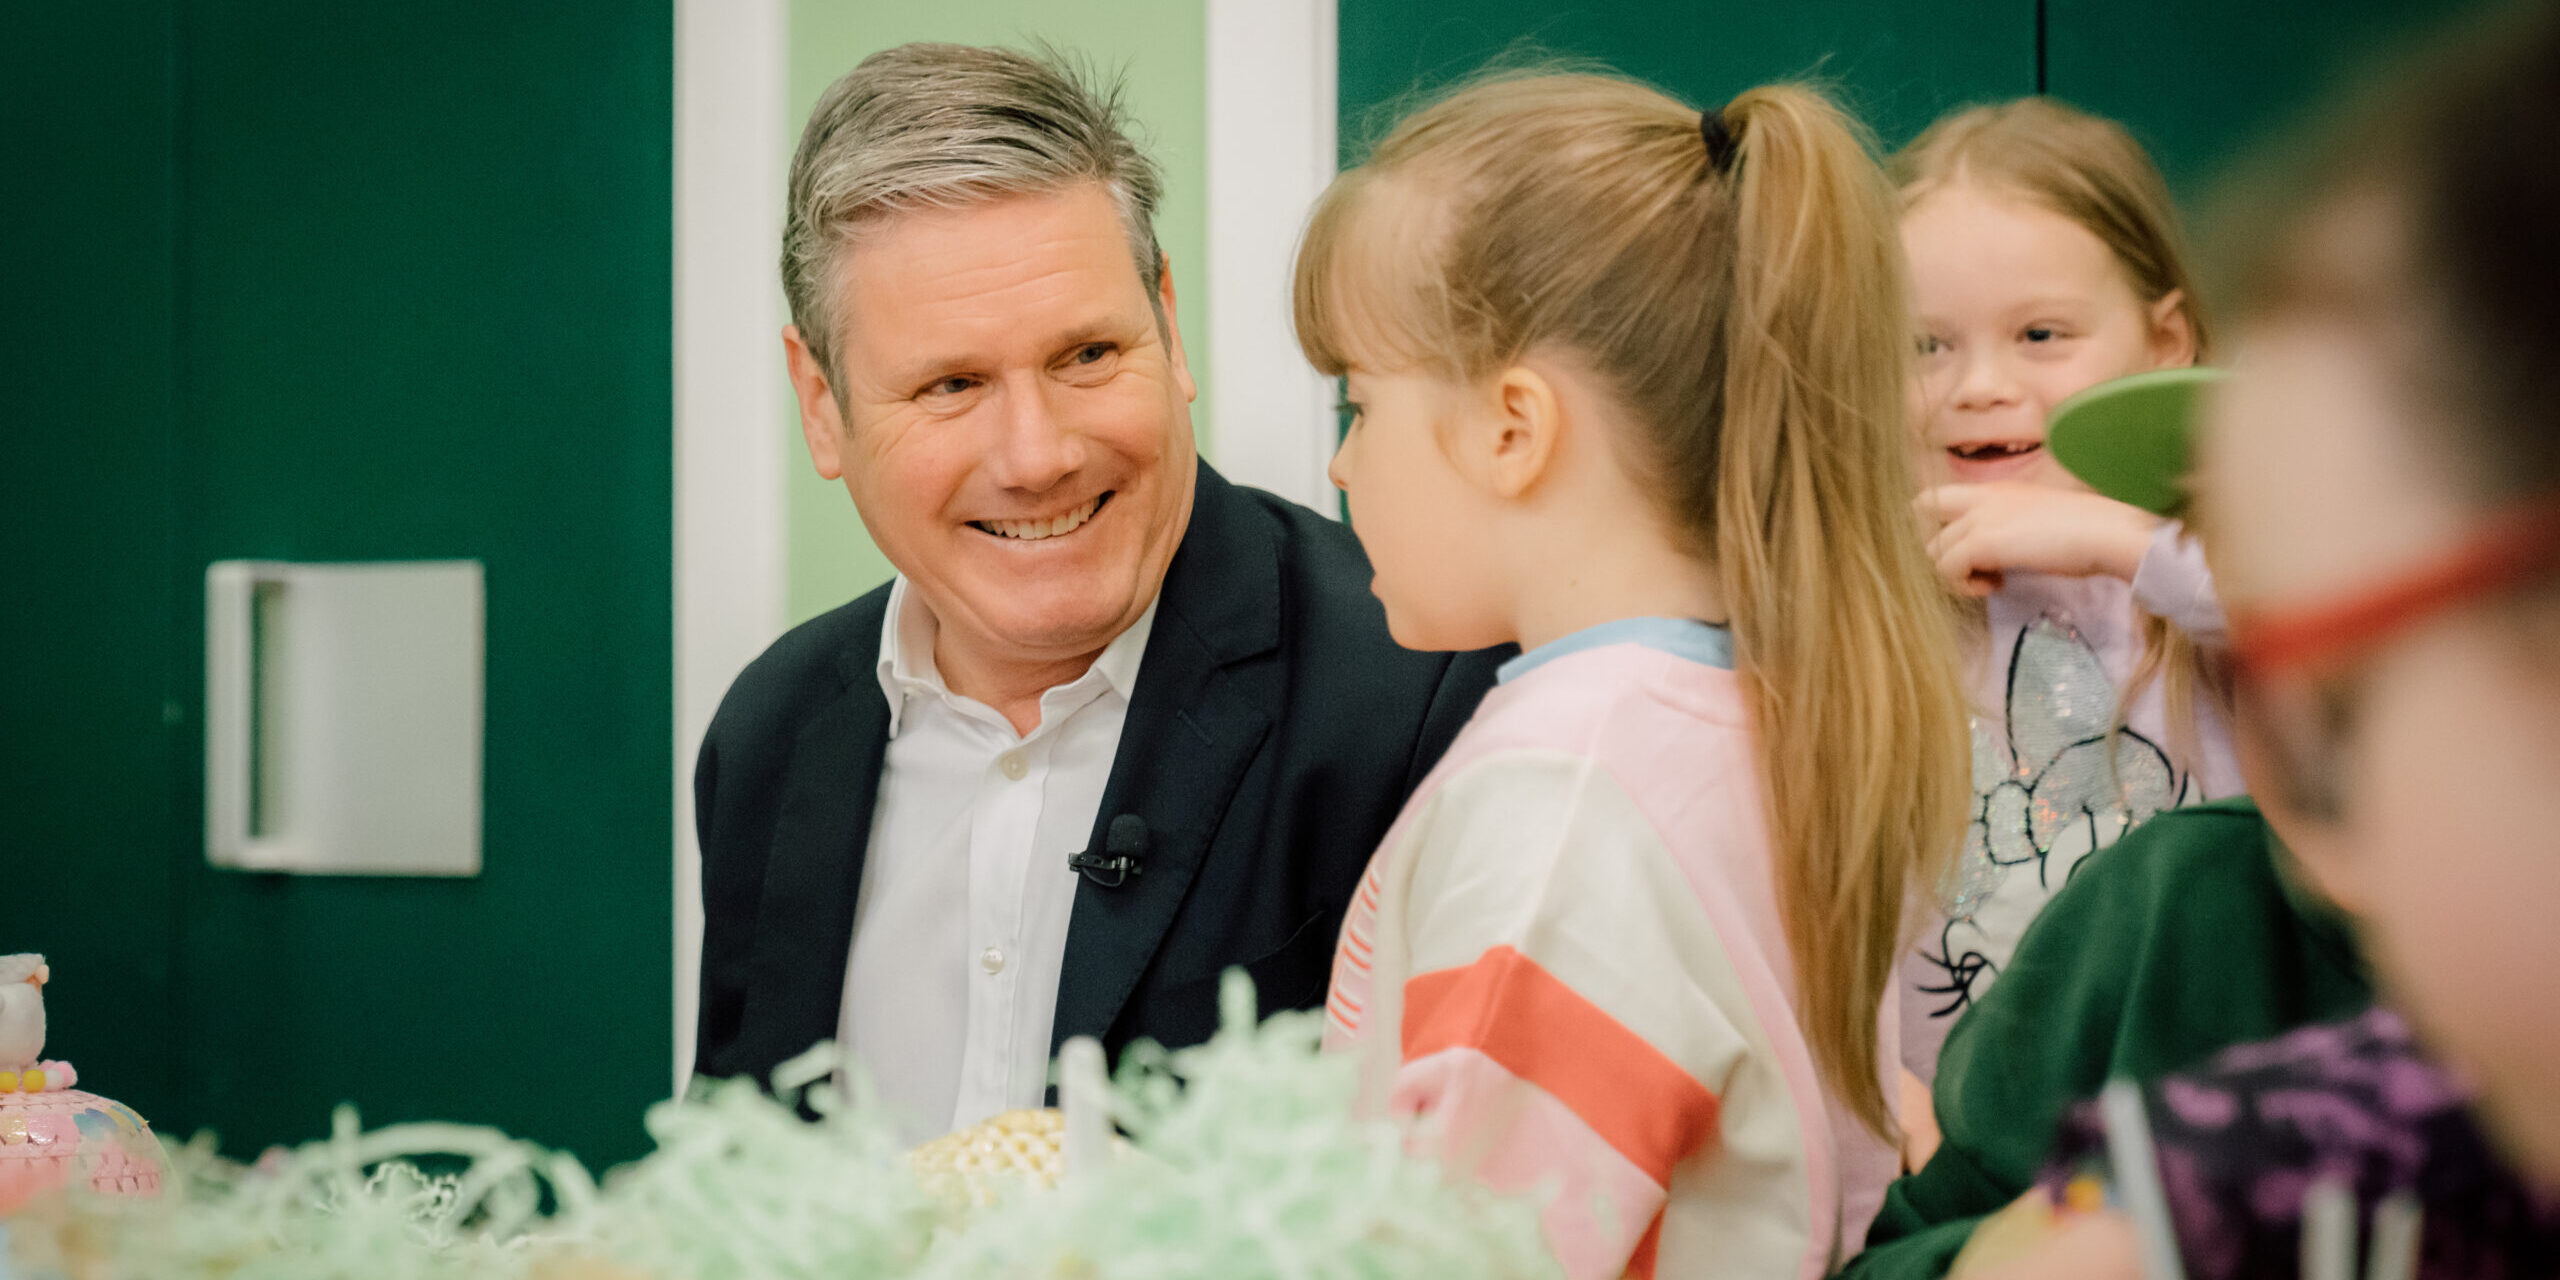 Keir Starmer sat at a table with a child